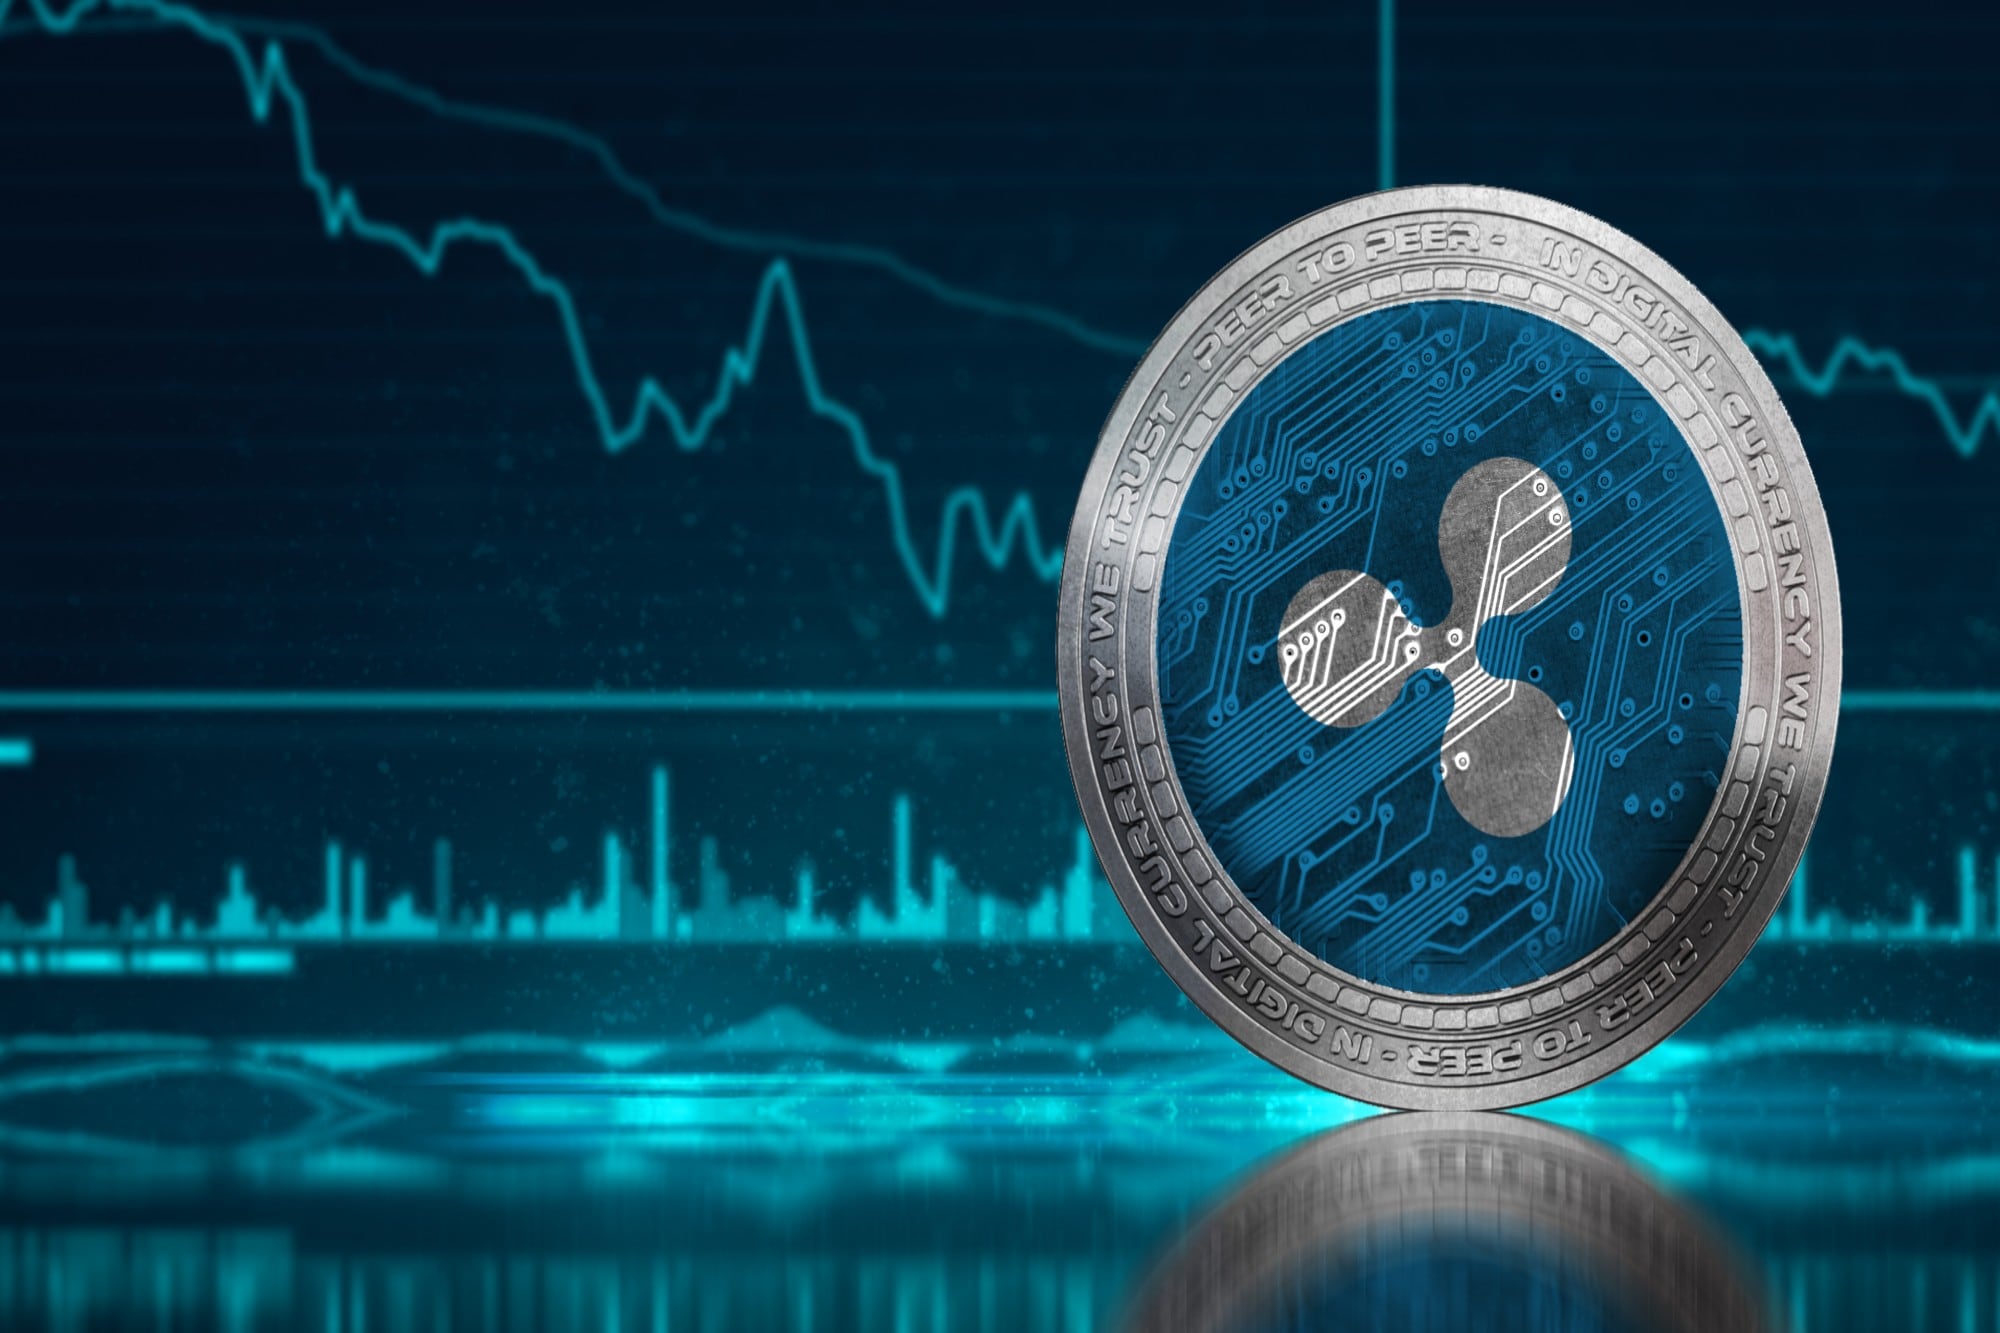  XRP:  It is a cryptocurrency token built as part of Ripple, which is considered as a cryptocurrency and a digital network for financial payments, respectively. The Ripple network has a protocol that can be used by financial institutions to transfer traditional money as well.  Price: 49.99. Mcap: USD 29 Billion YTD: +185.39%.